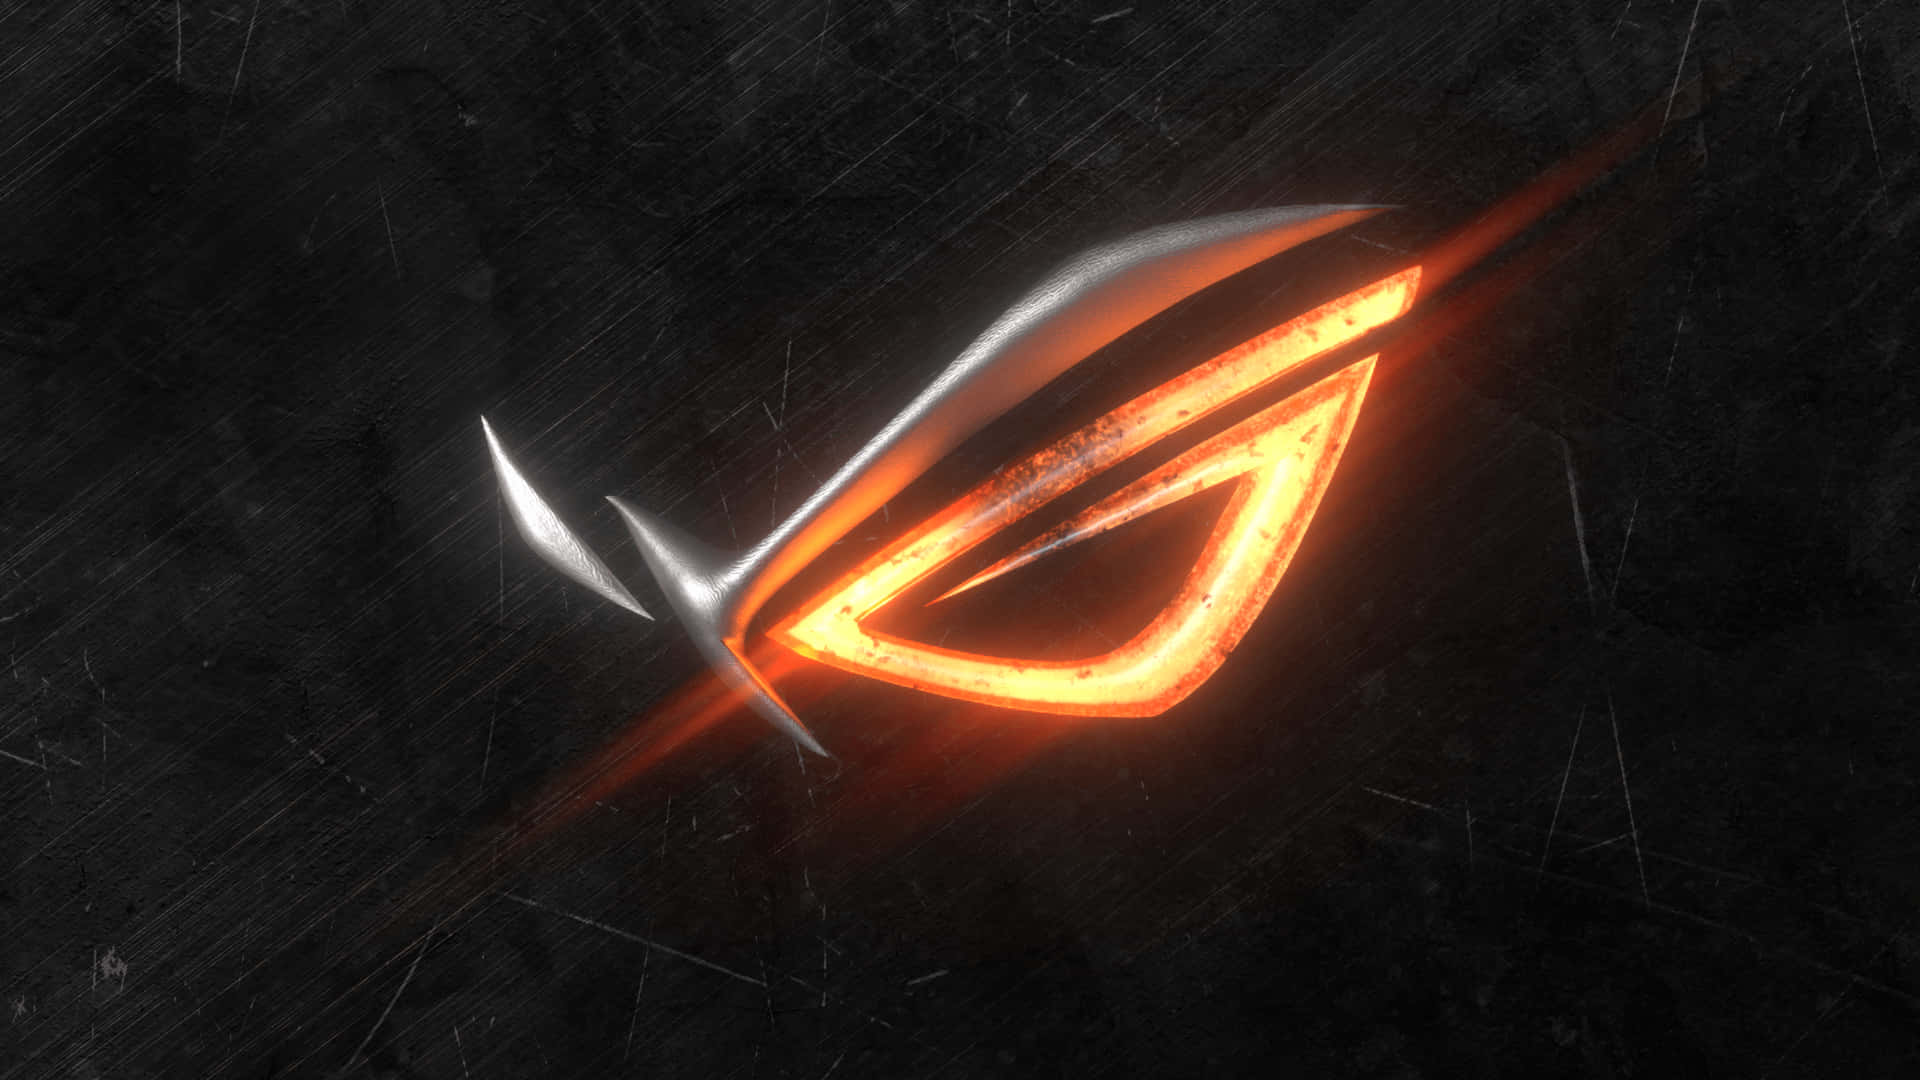 Dominate the gaming world with ASUS ROG